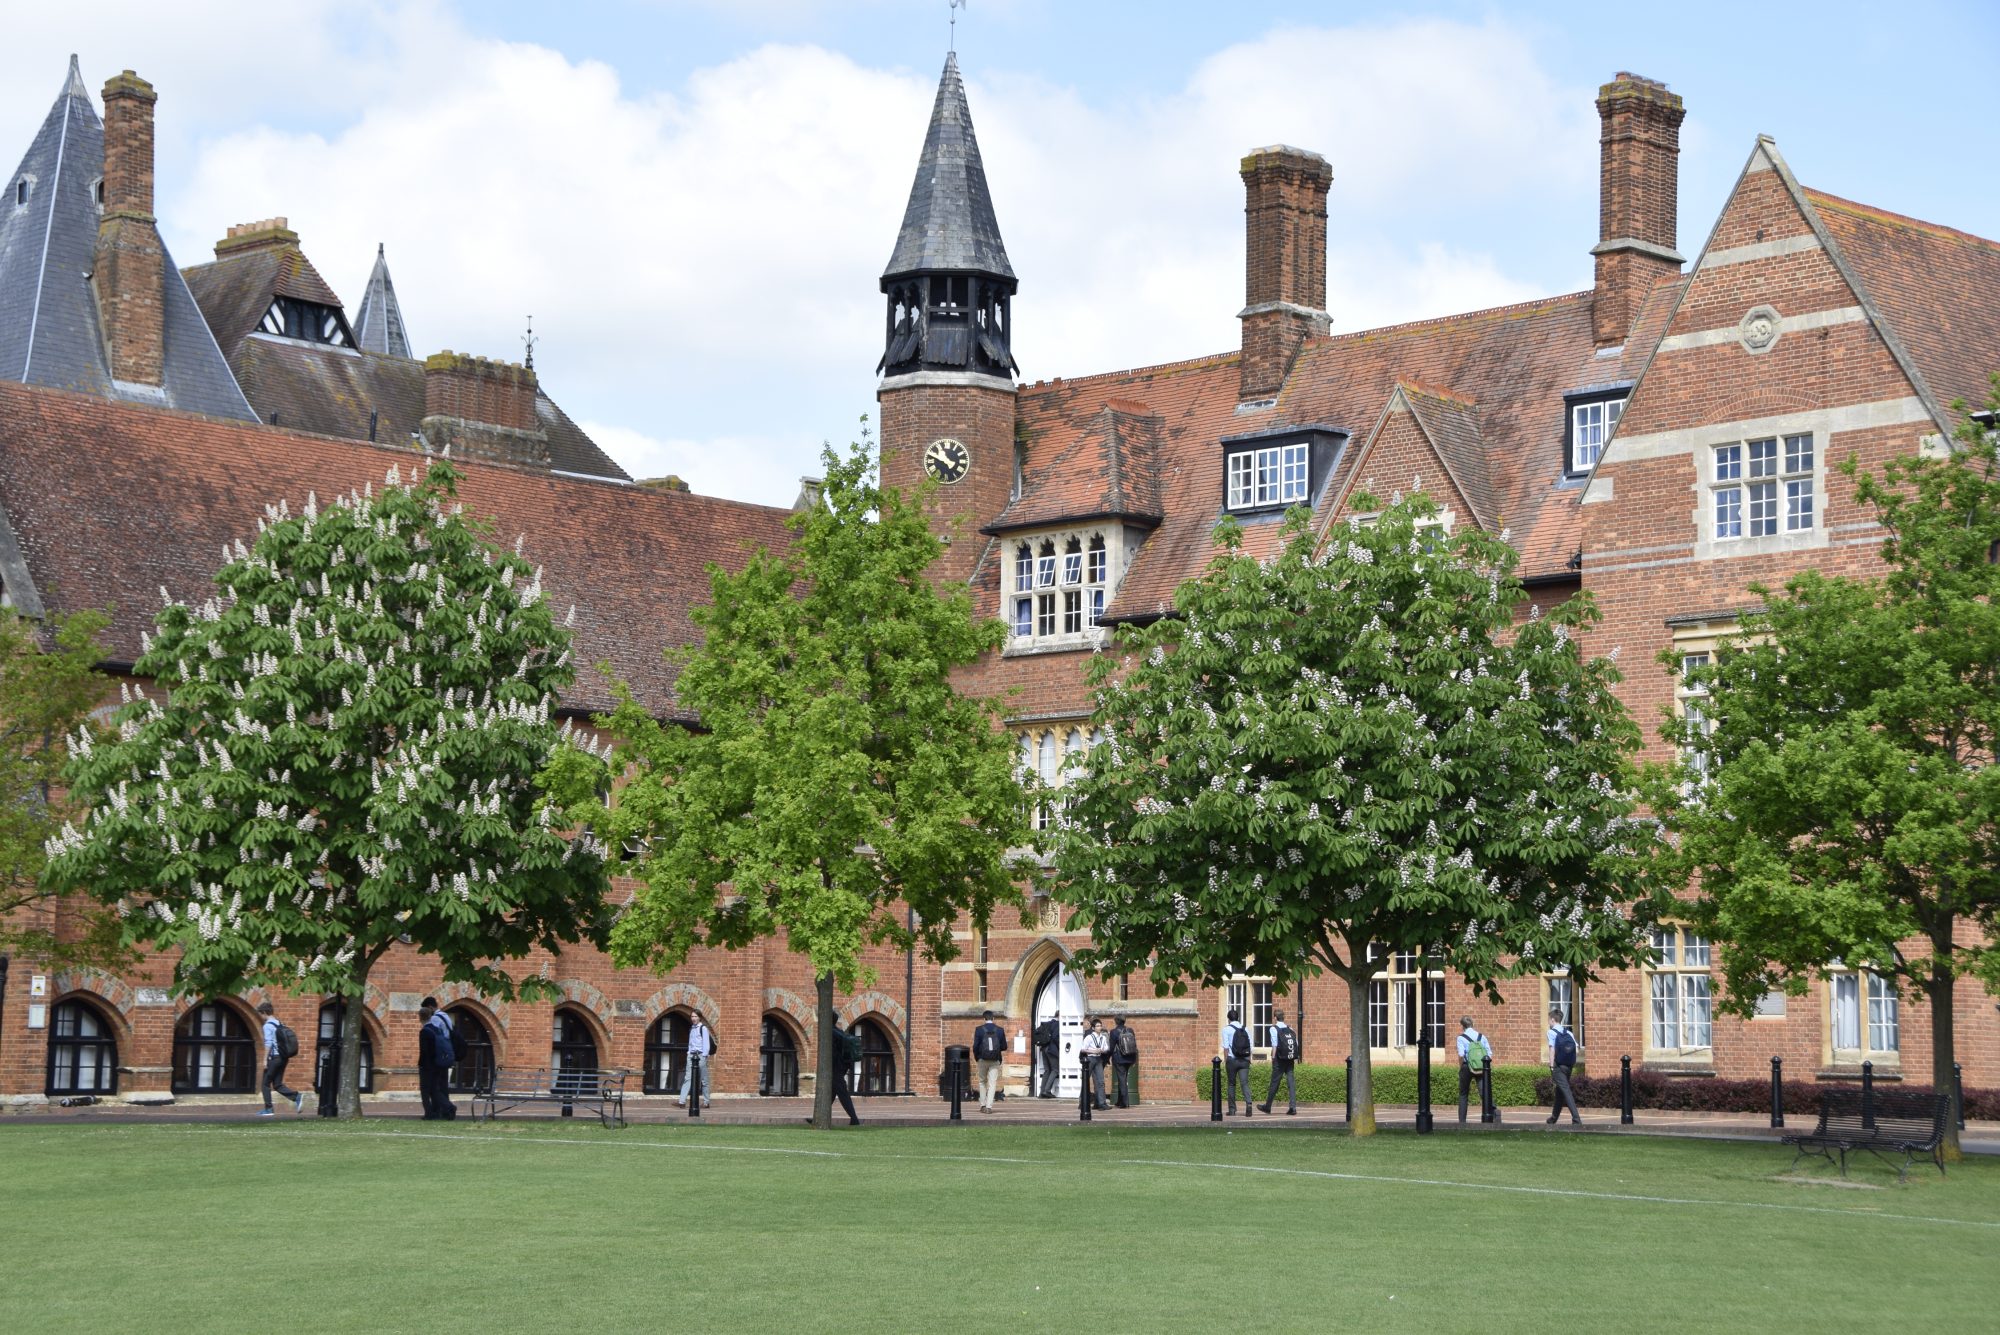 Abingdon is a leading independent day and boarding school for boys aged 11-18, located in Oxfordshire.